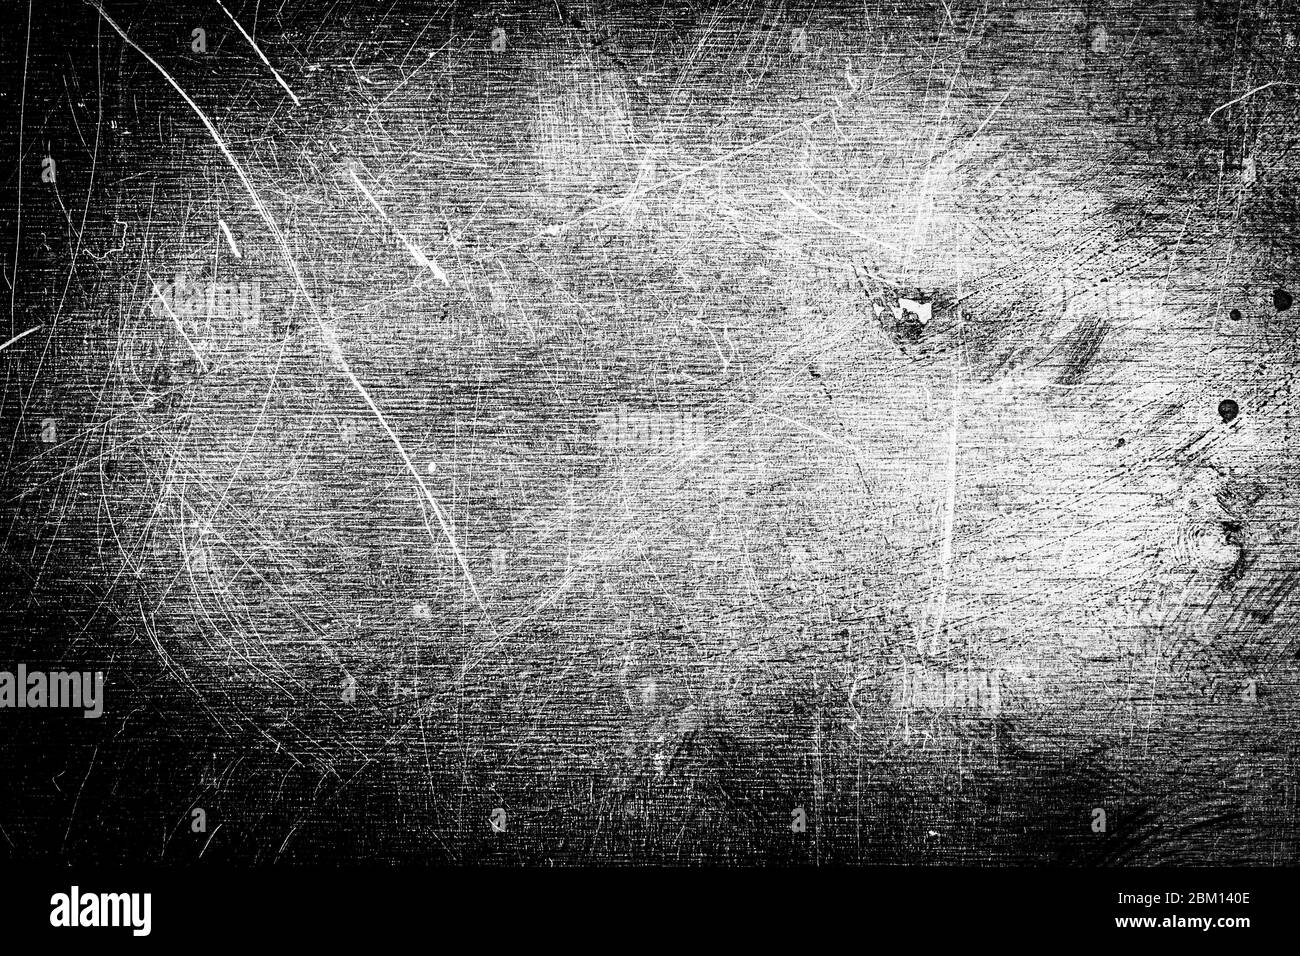 Scratched dirty dusty copper plate texture, old metal background. Cloudy and scratchy brass. Black and white image. Stock Photo